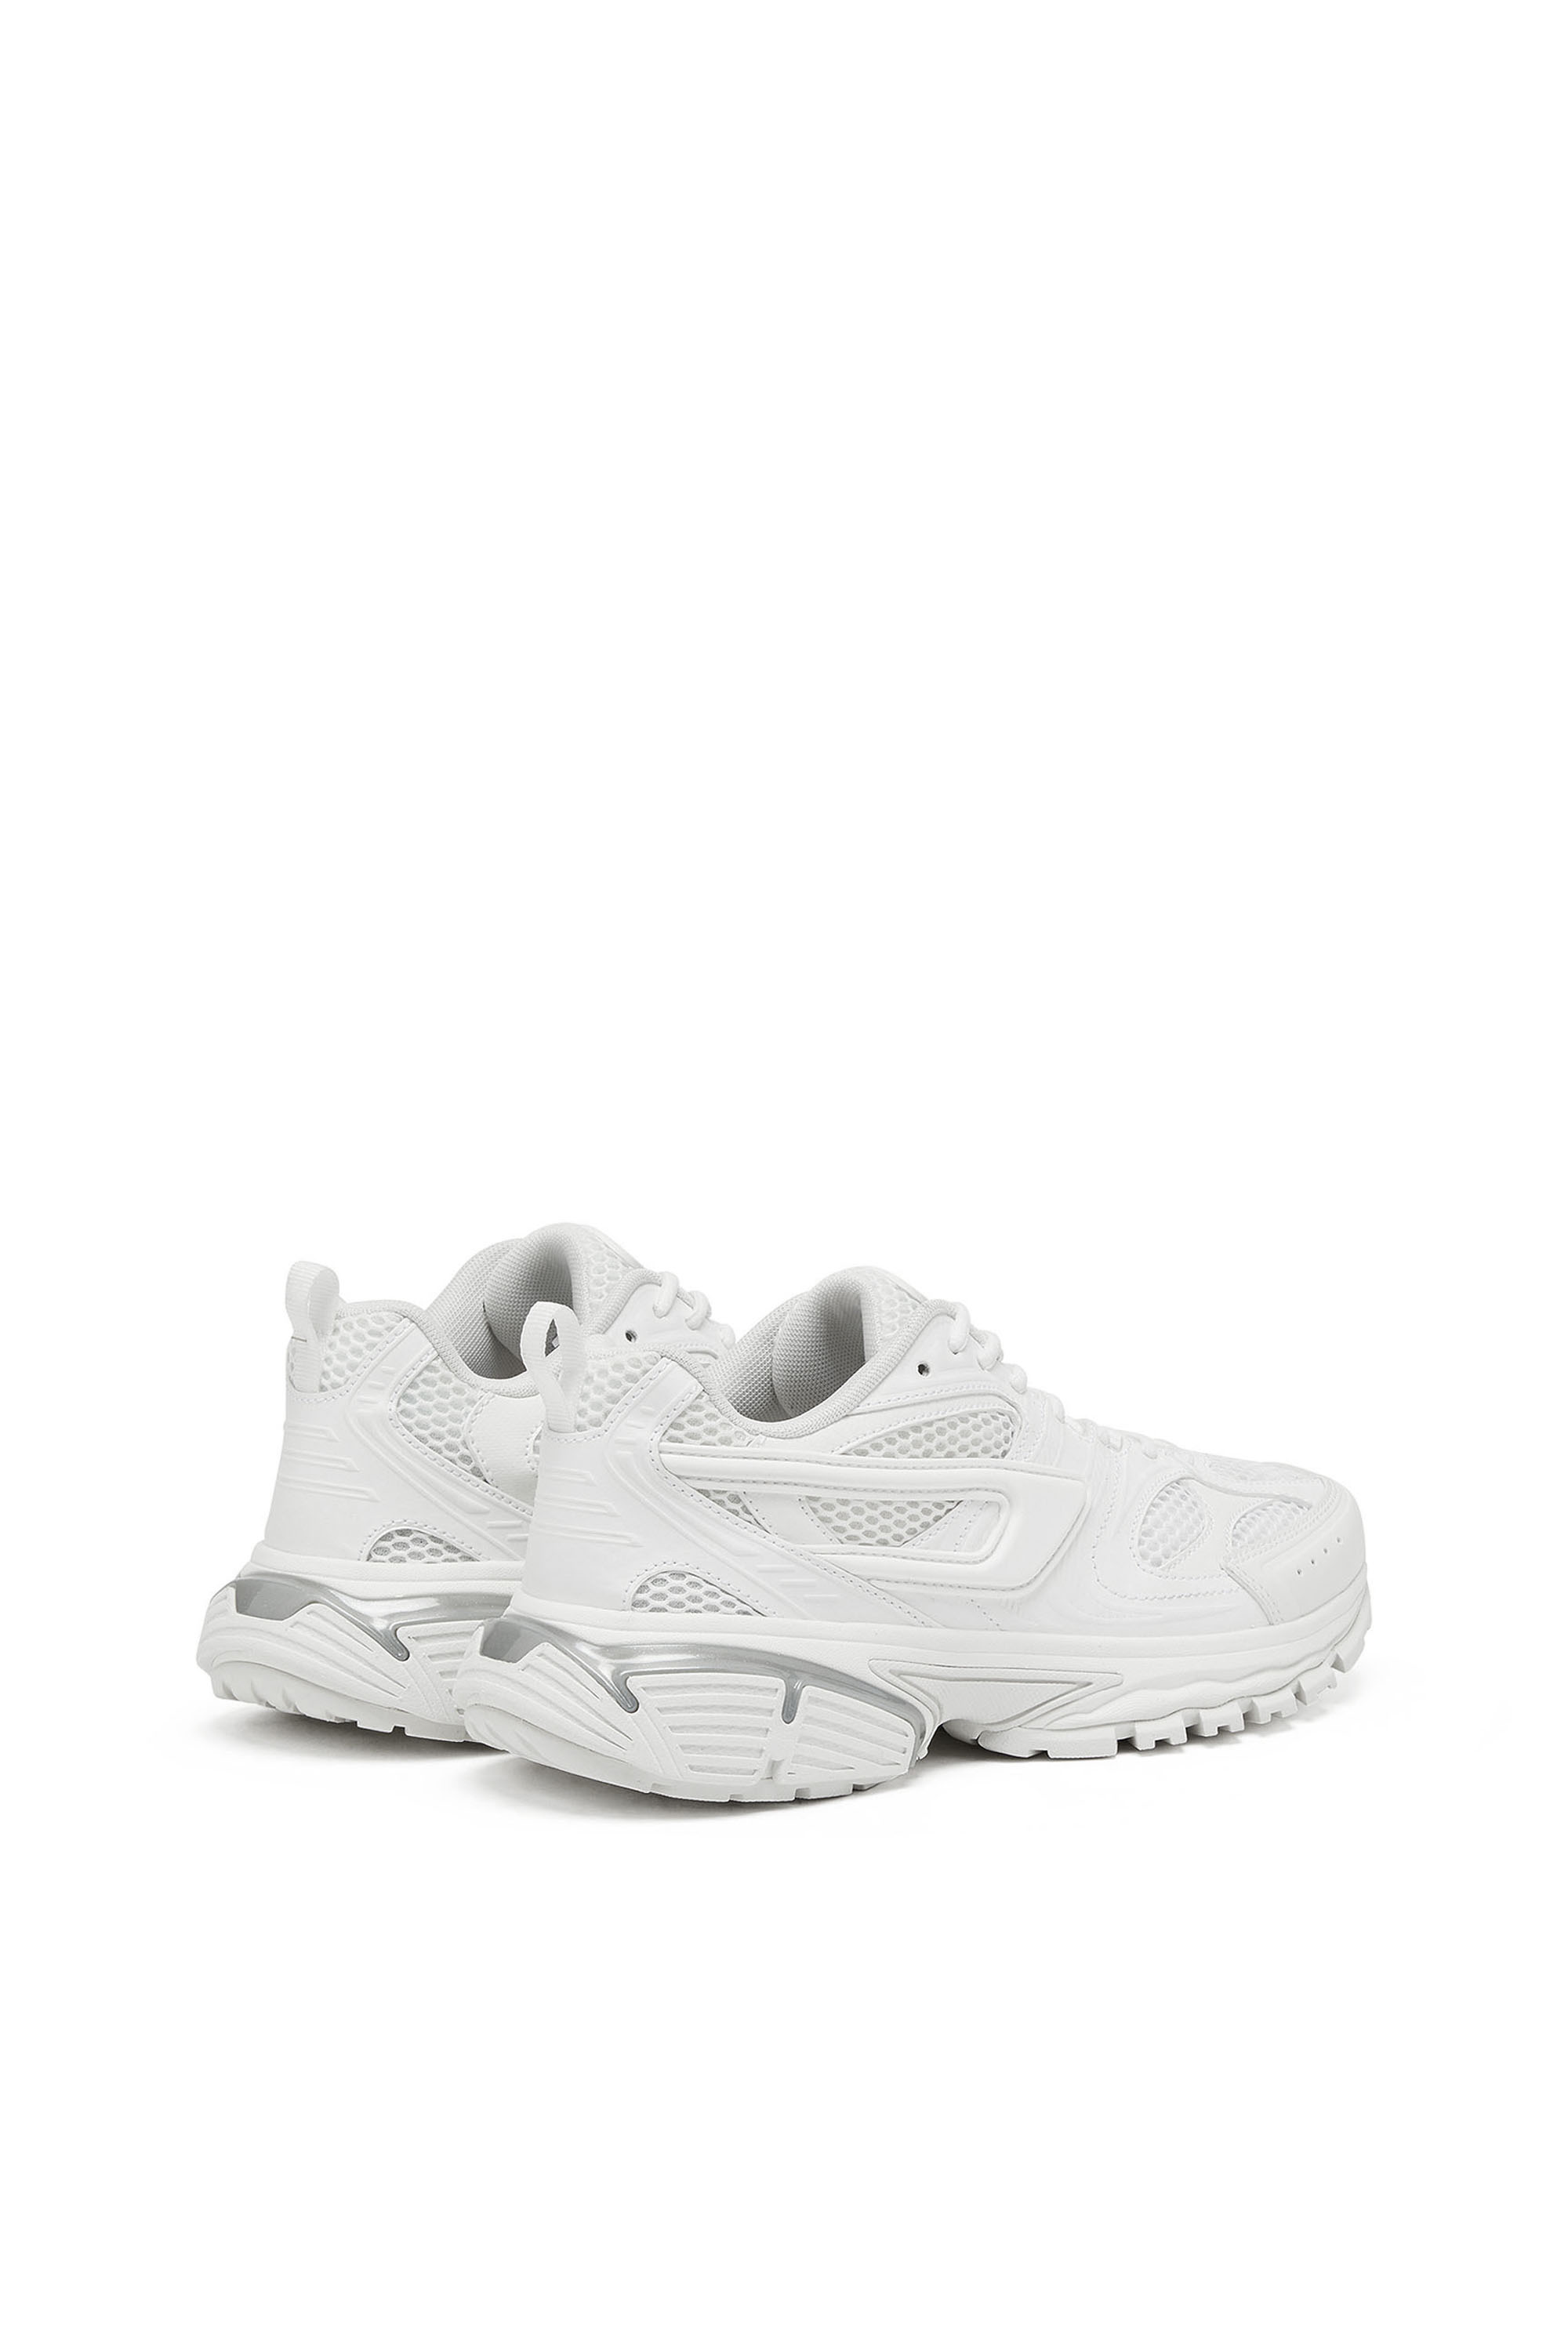 Diesel - S-SERENDIPITY PRO-X1 W, Woman S-Serendipity-Monochrome sneakers in mesh and PU in White - Image 3